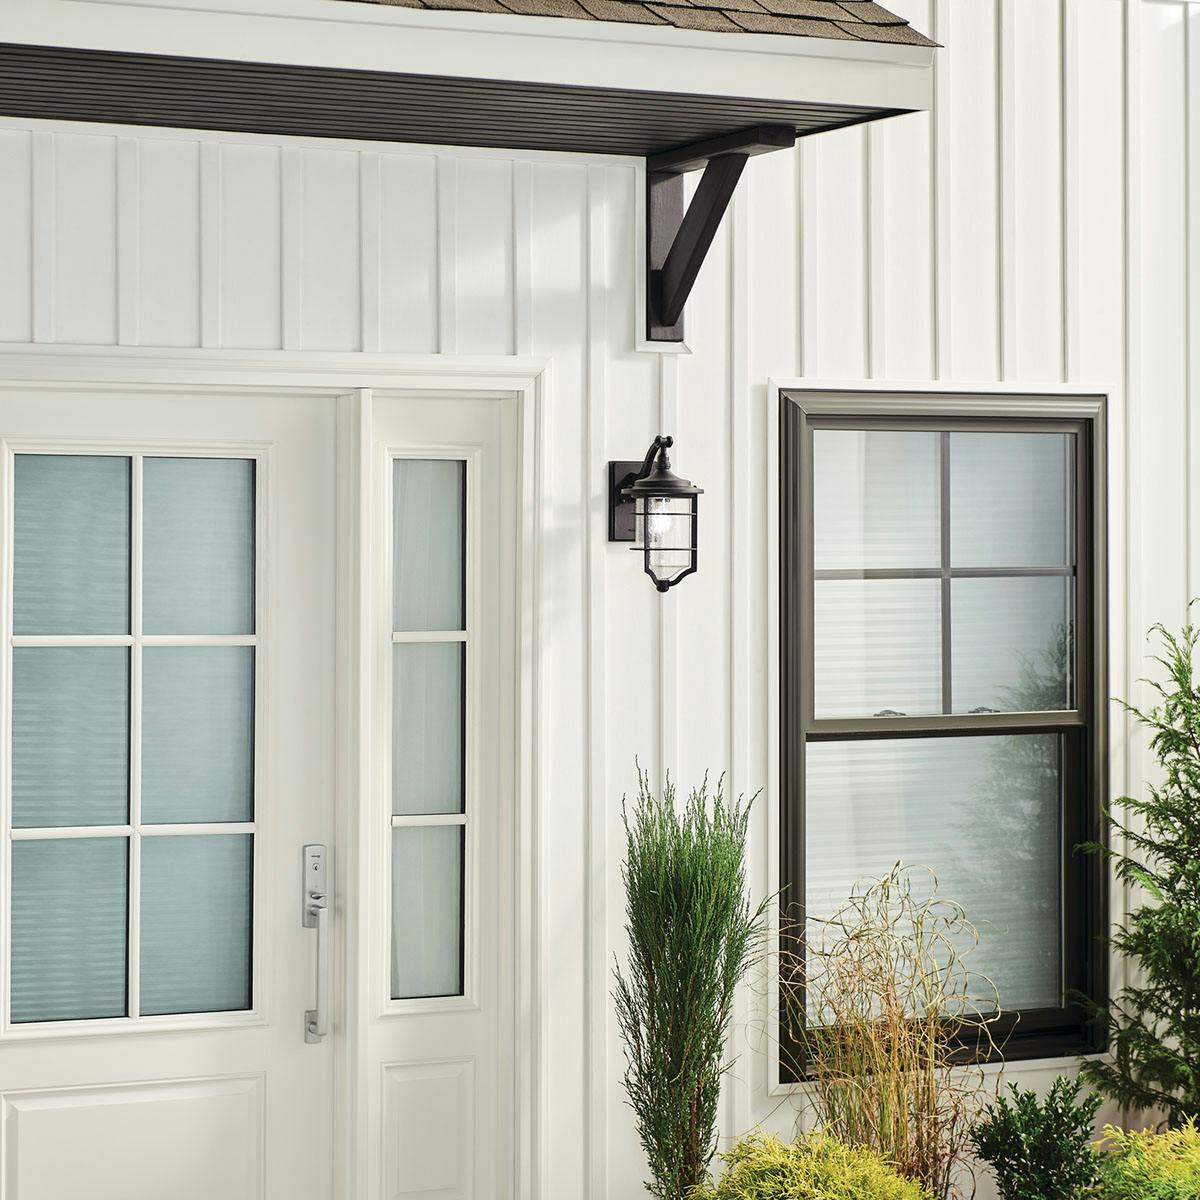 Day time Exterior image featuring Royal Marine outdoor wall light 49126DBK